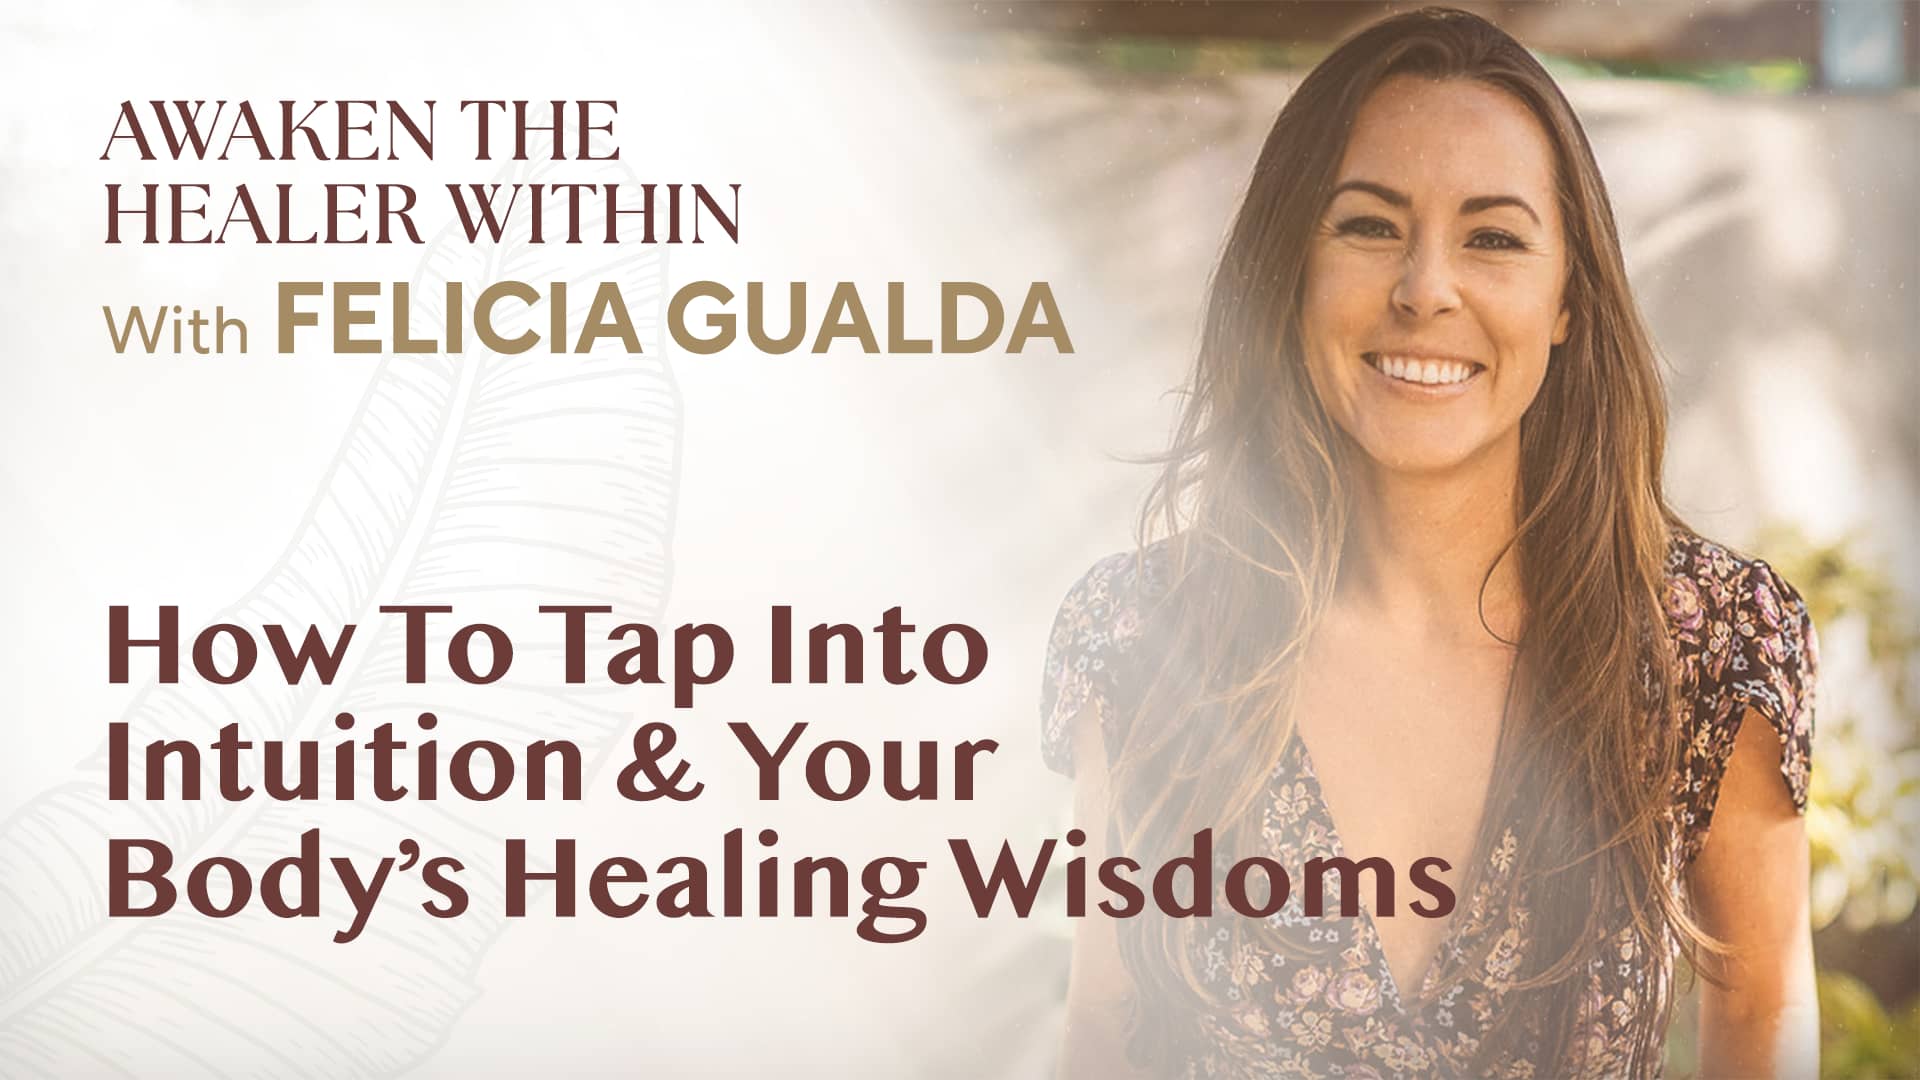 How To Tap Into Intuition & Your Body’s Healing Wisdom